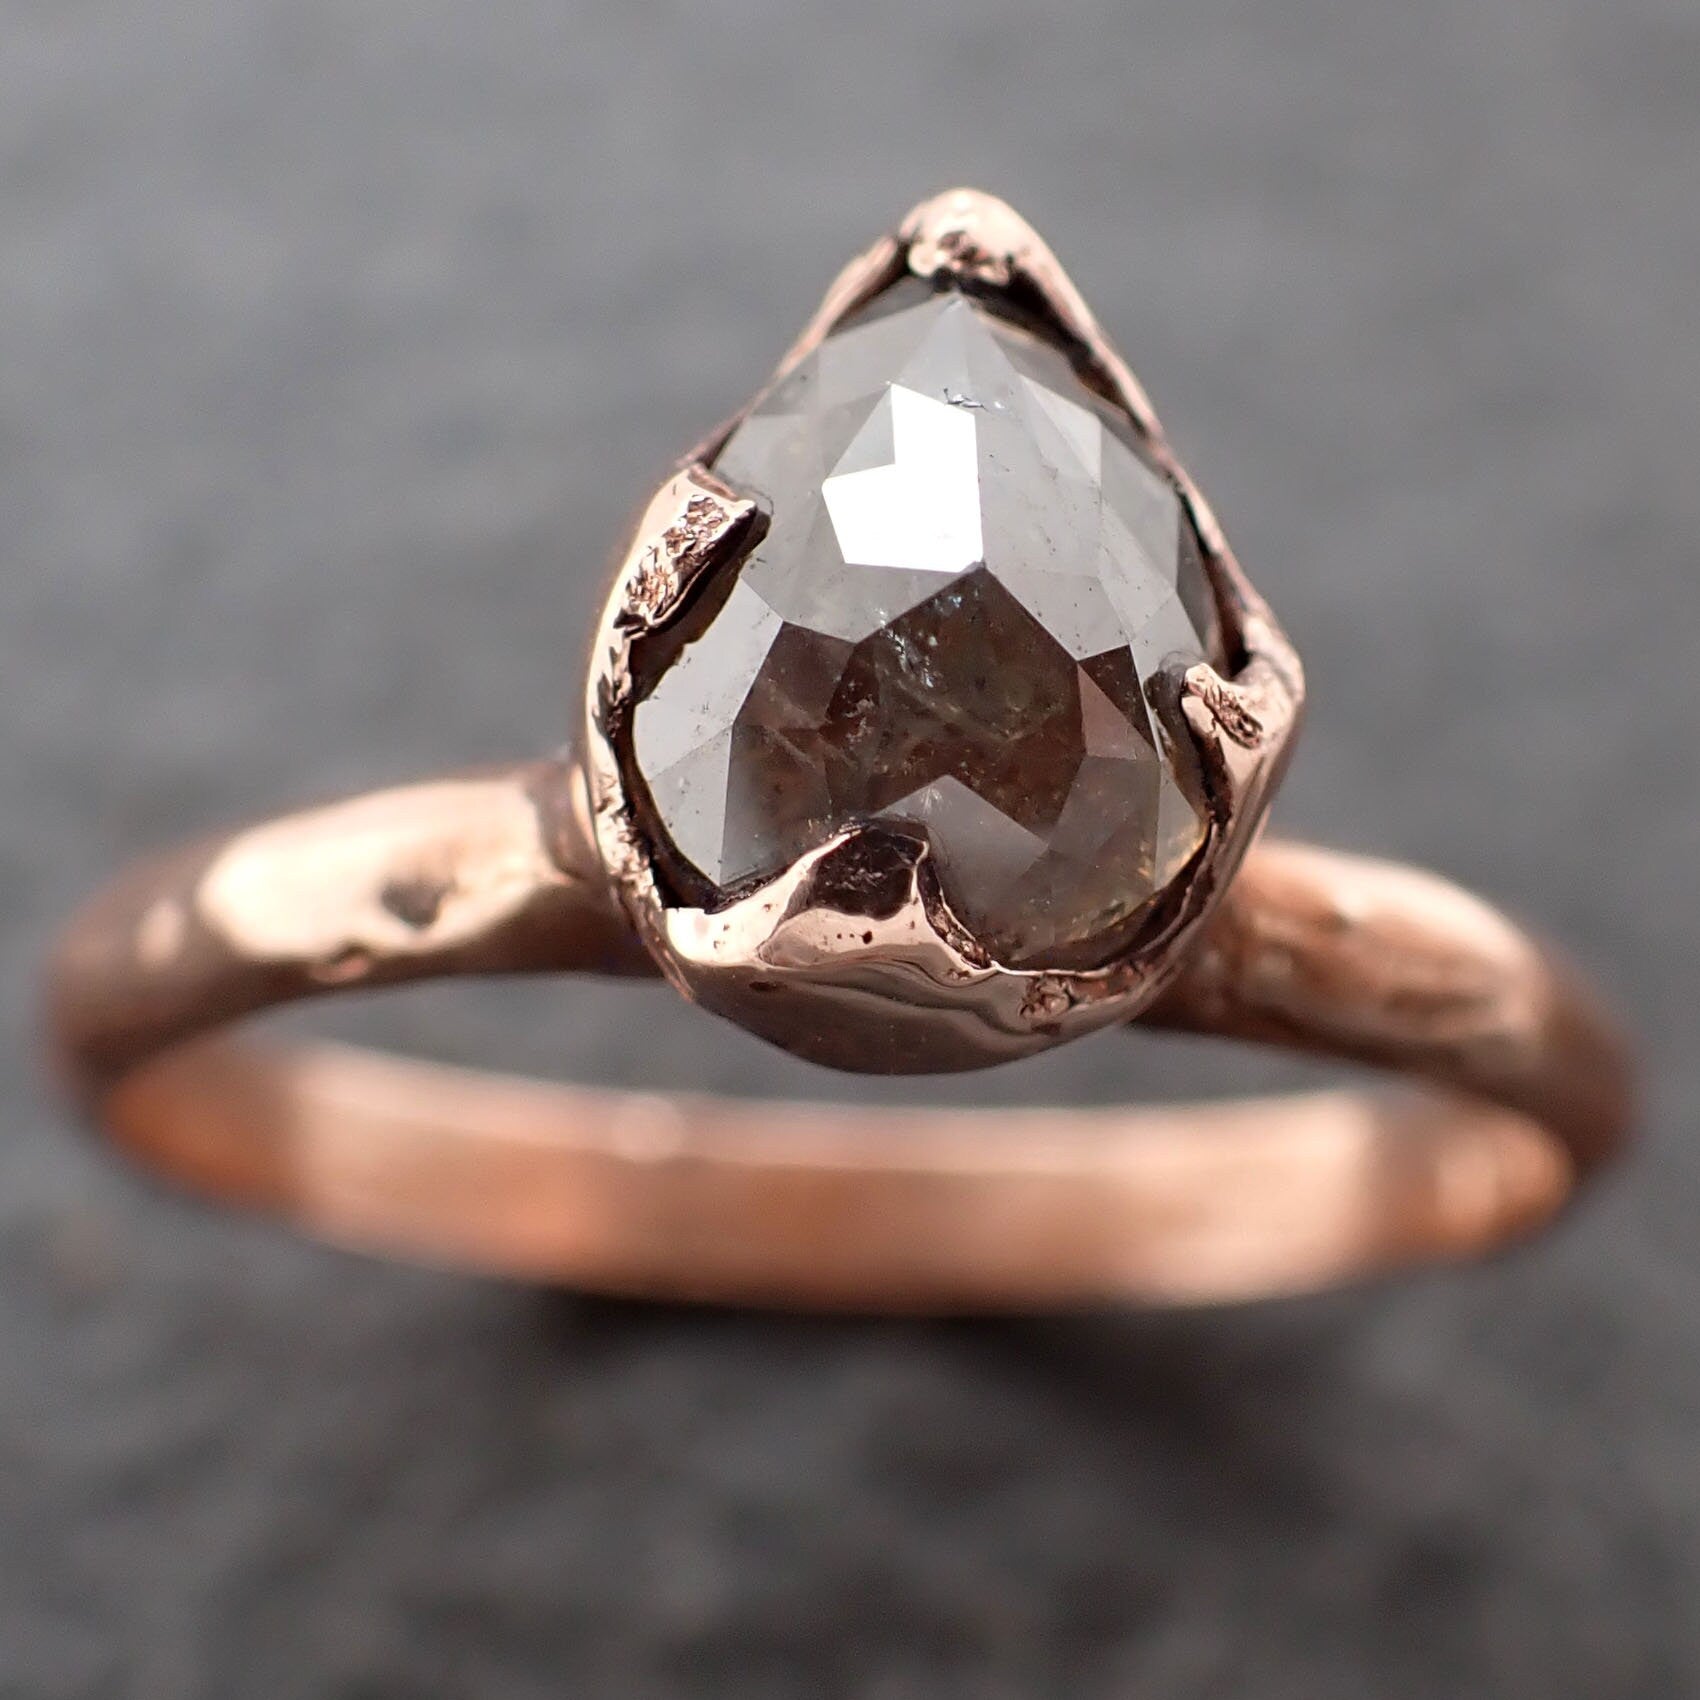 Faceted Fancy cut Salt and Pepper Diamond Solitaire Engagement 14k Rose Gold Wedding Ring byAngeline 3191